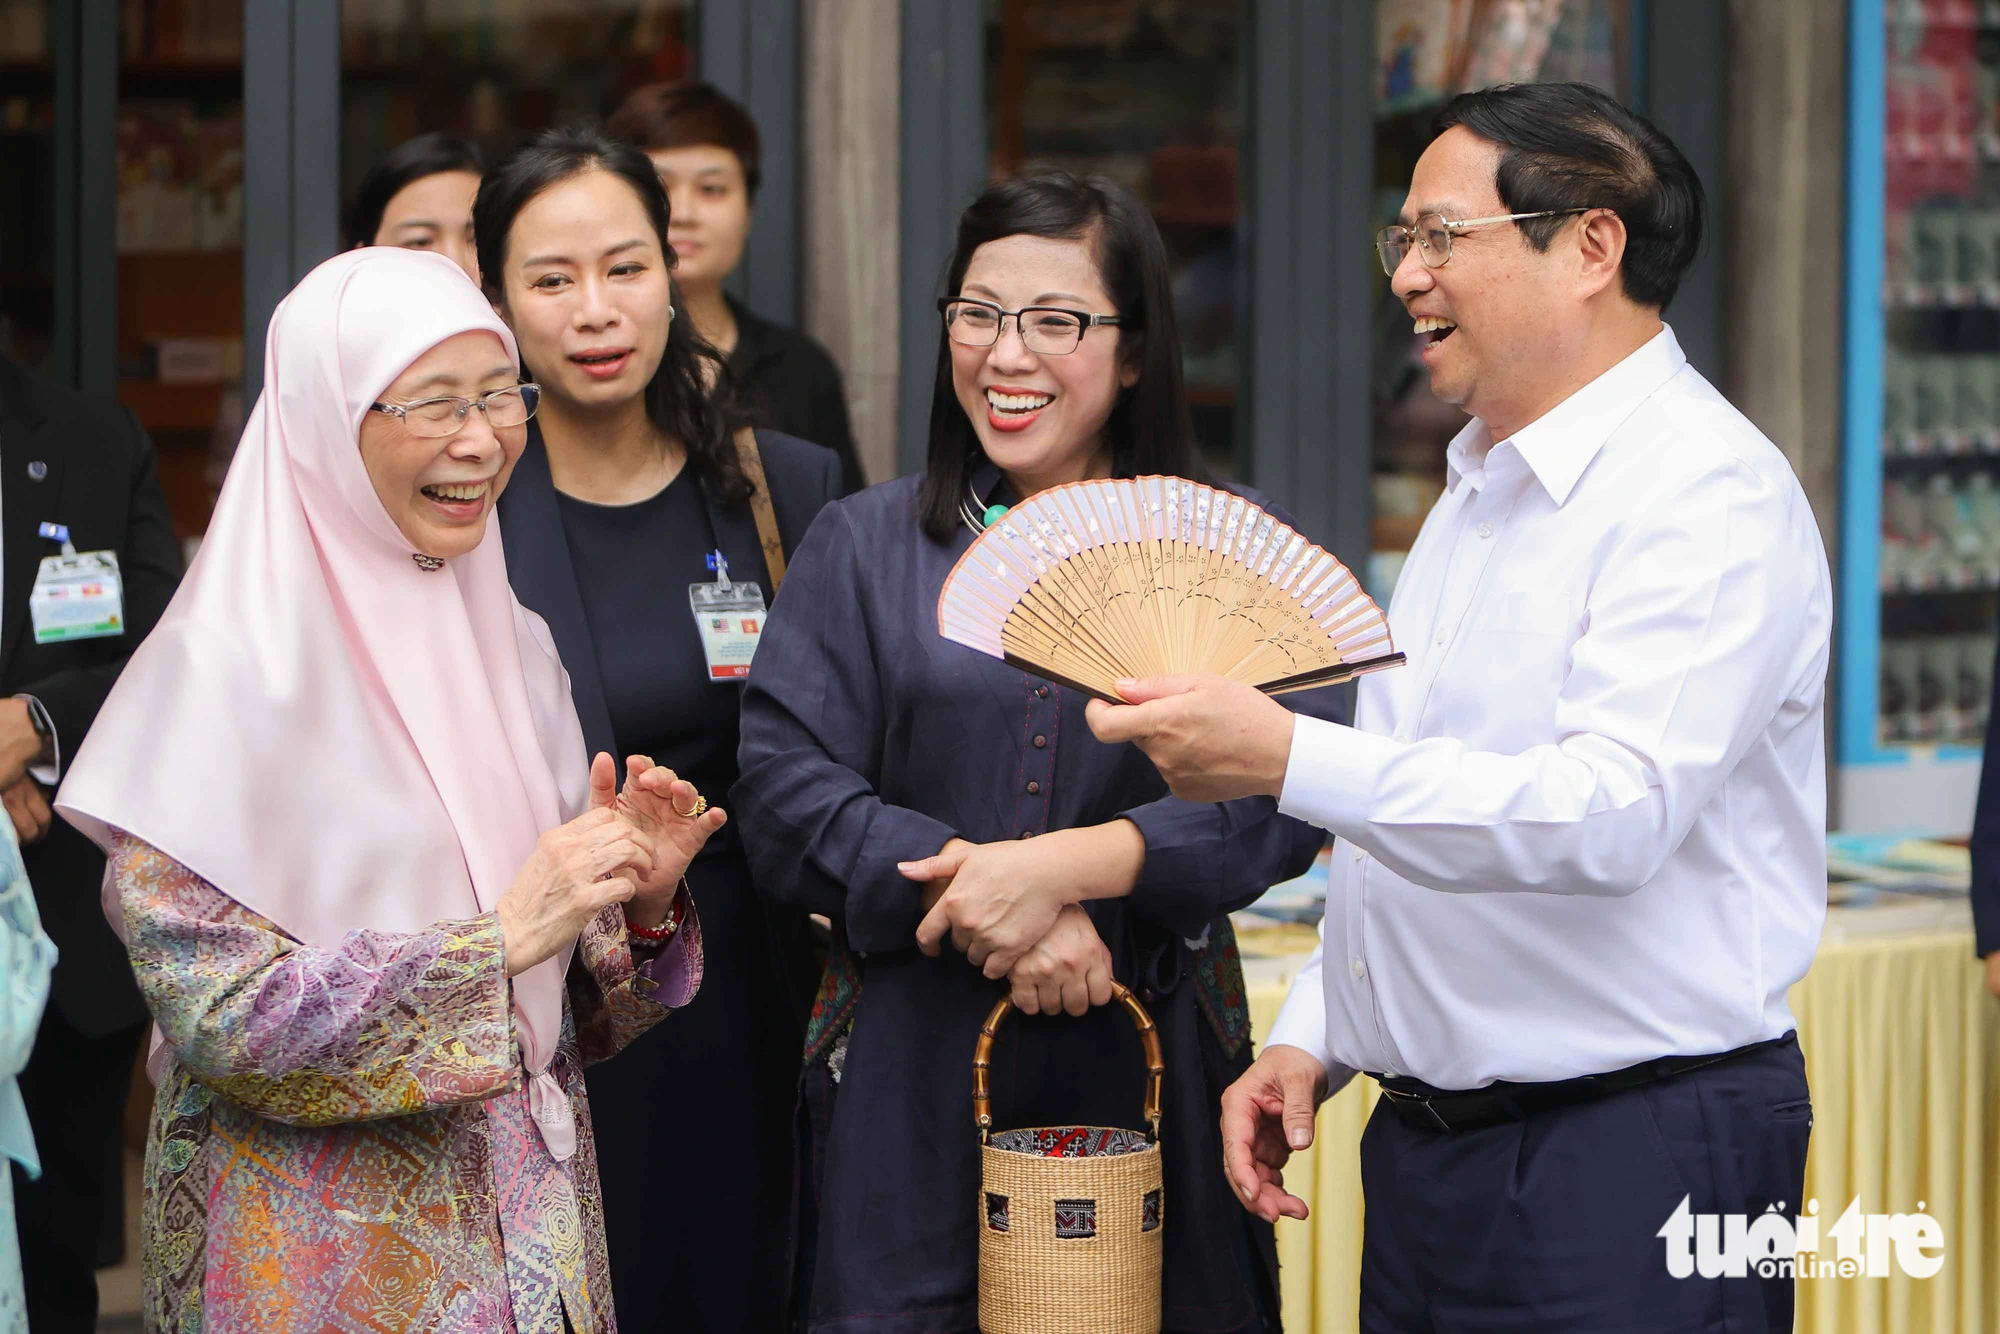 Malaysian Prime Minister Anwar Ibrahim’s spouse Dato' Seri Dr. Wan Azizah Binti Wan Ismail (L, 1st) laughed and thanked PM Chinh (R, 1st) for using a fan to cool down her and his spouse (R, 2nd). Photo: Nguyen Khanh / Tuoi Tre